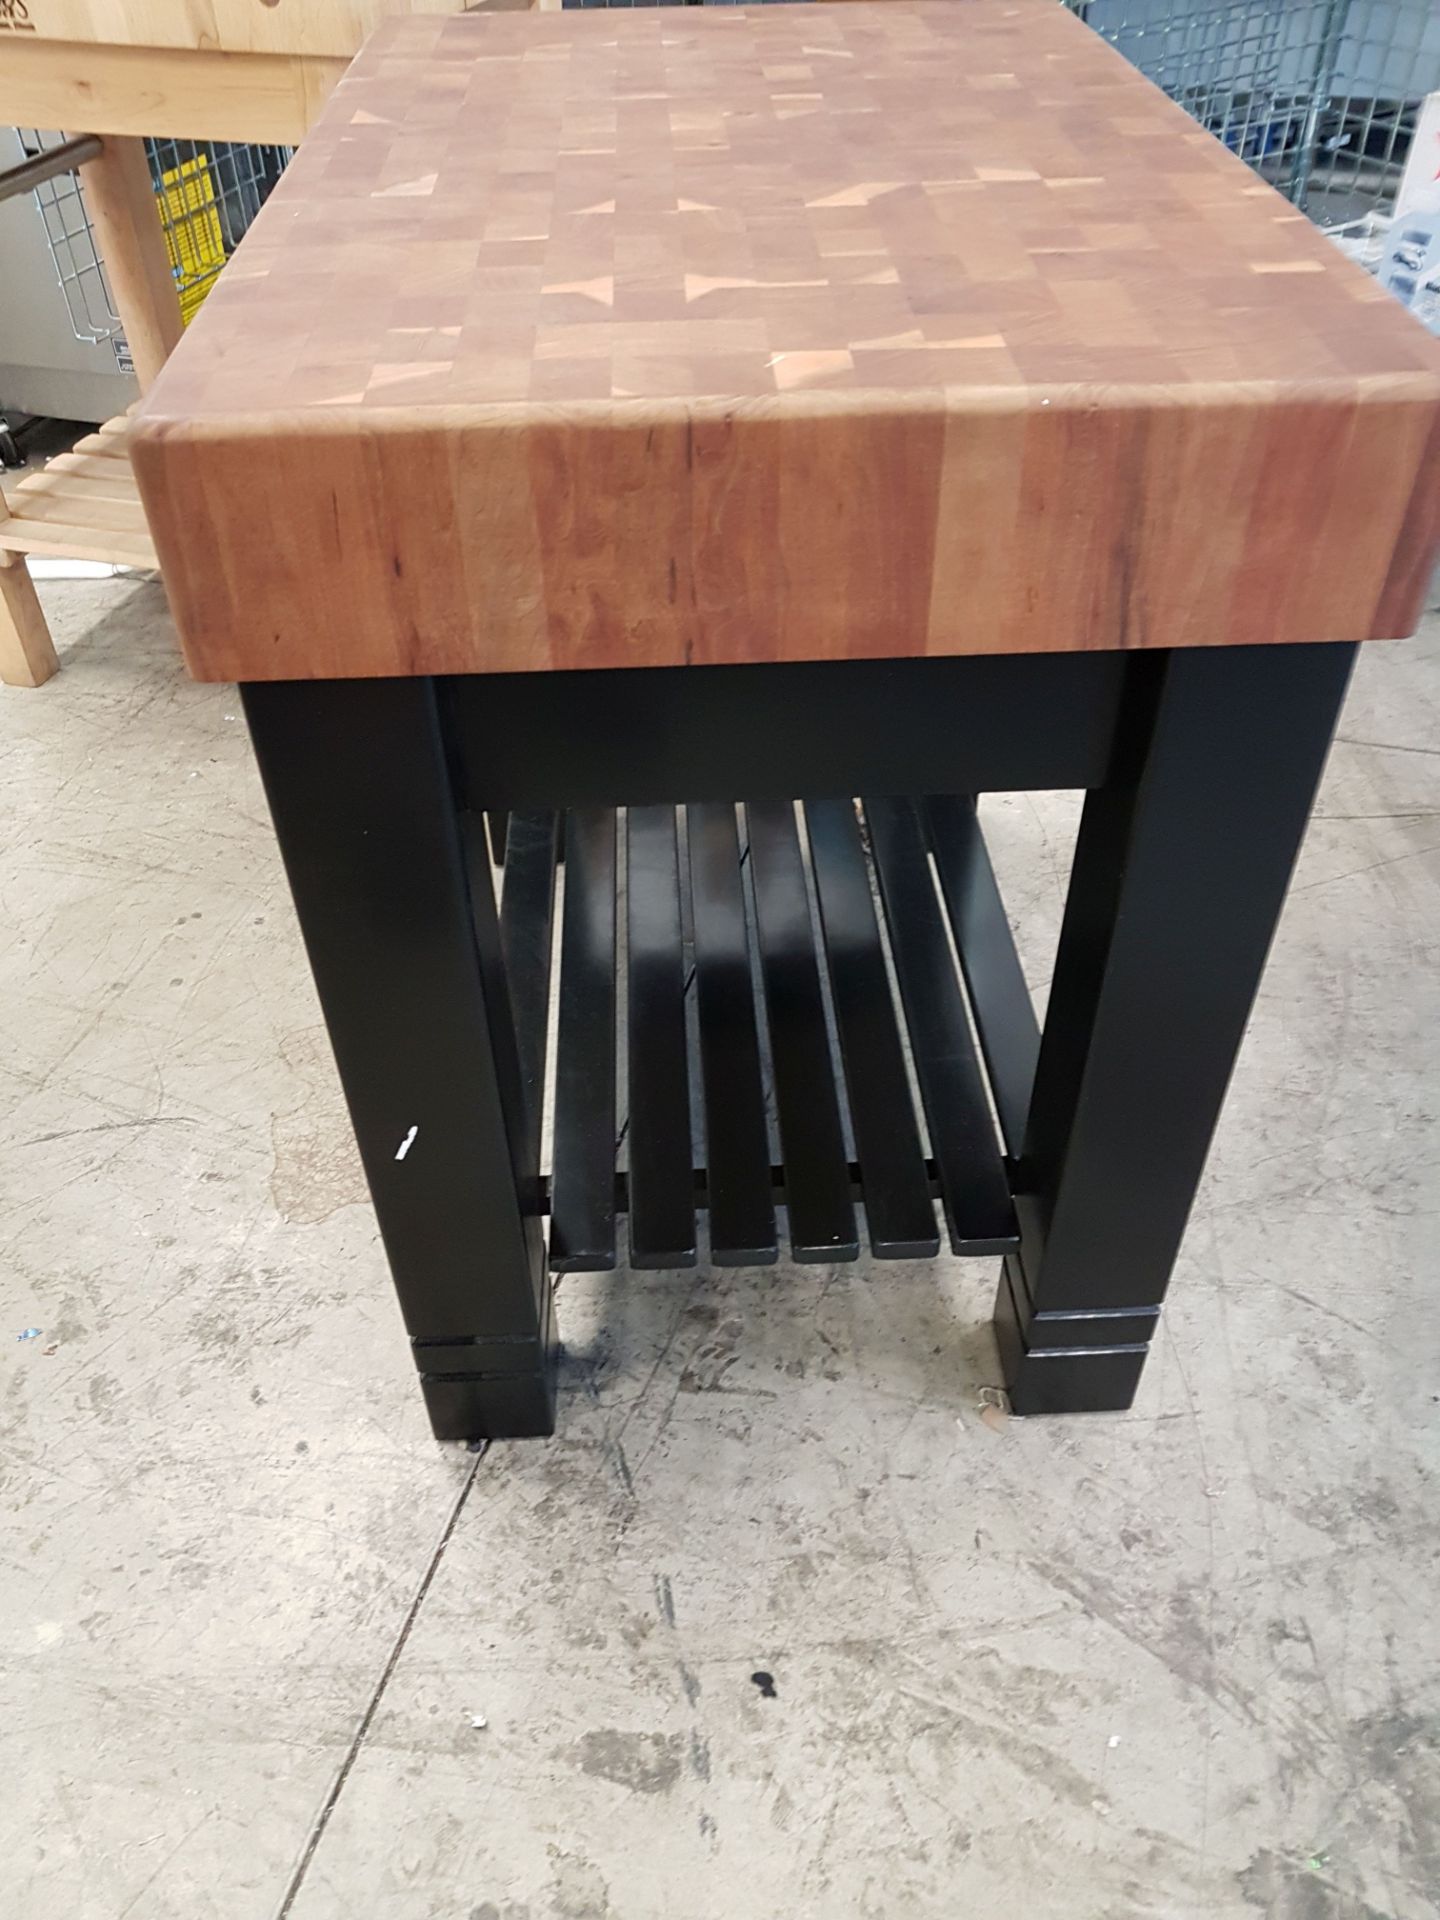 Cherry Wood Butcher Block Table - 24" X 36" X 5" Thick Top with Drawer - John Boos - Image 3 of 3